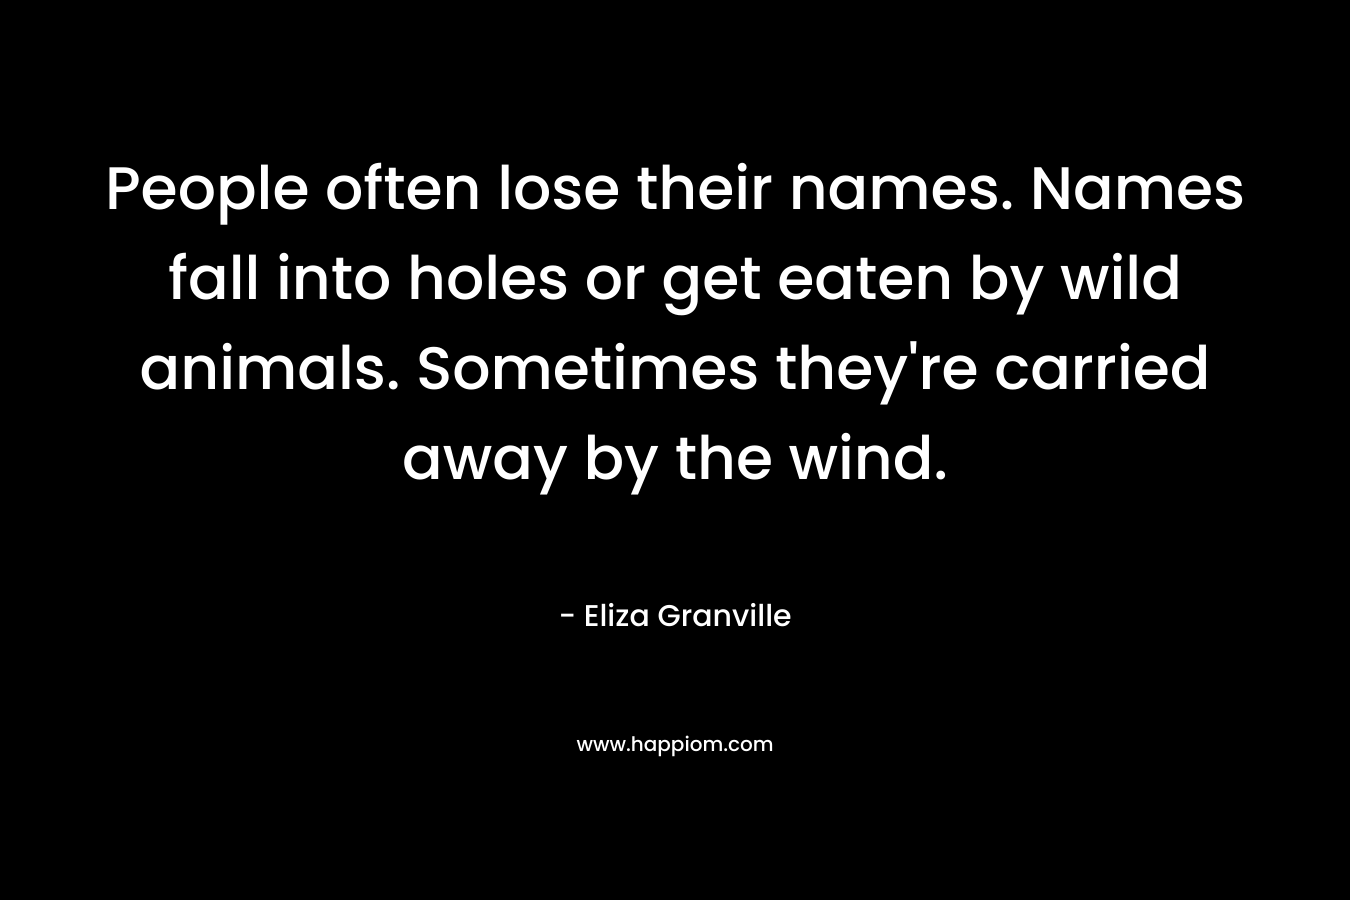 People often lose their names. Names fall into holes or get eaten by wild animals. Sometimes they're carried away by the wind.